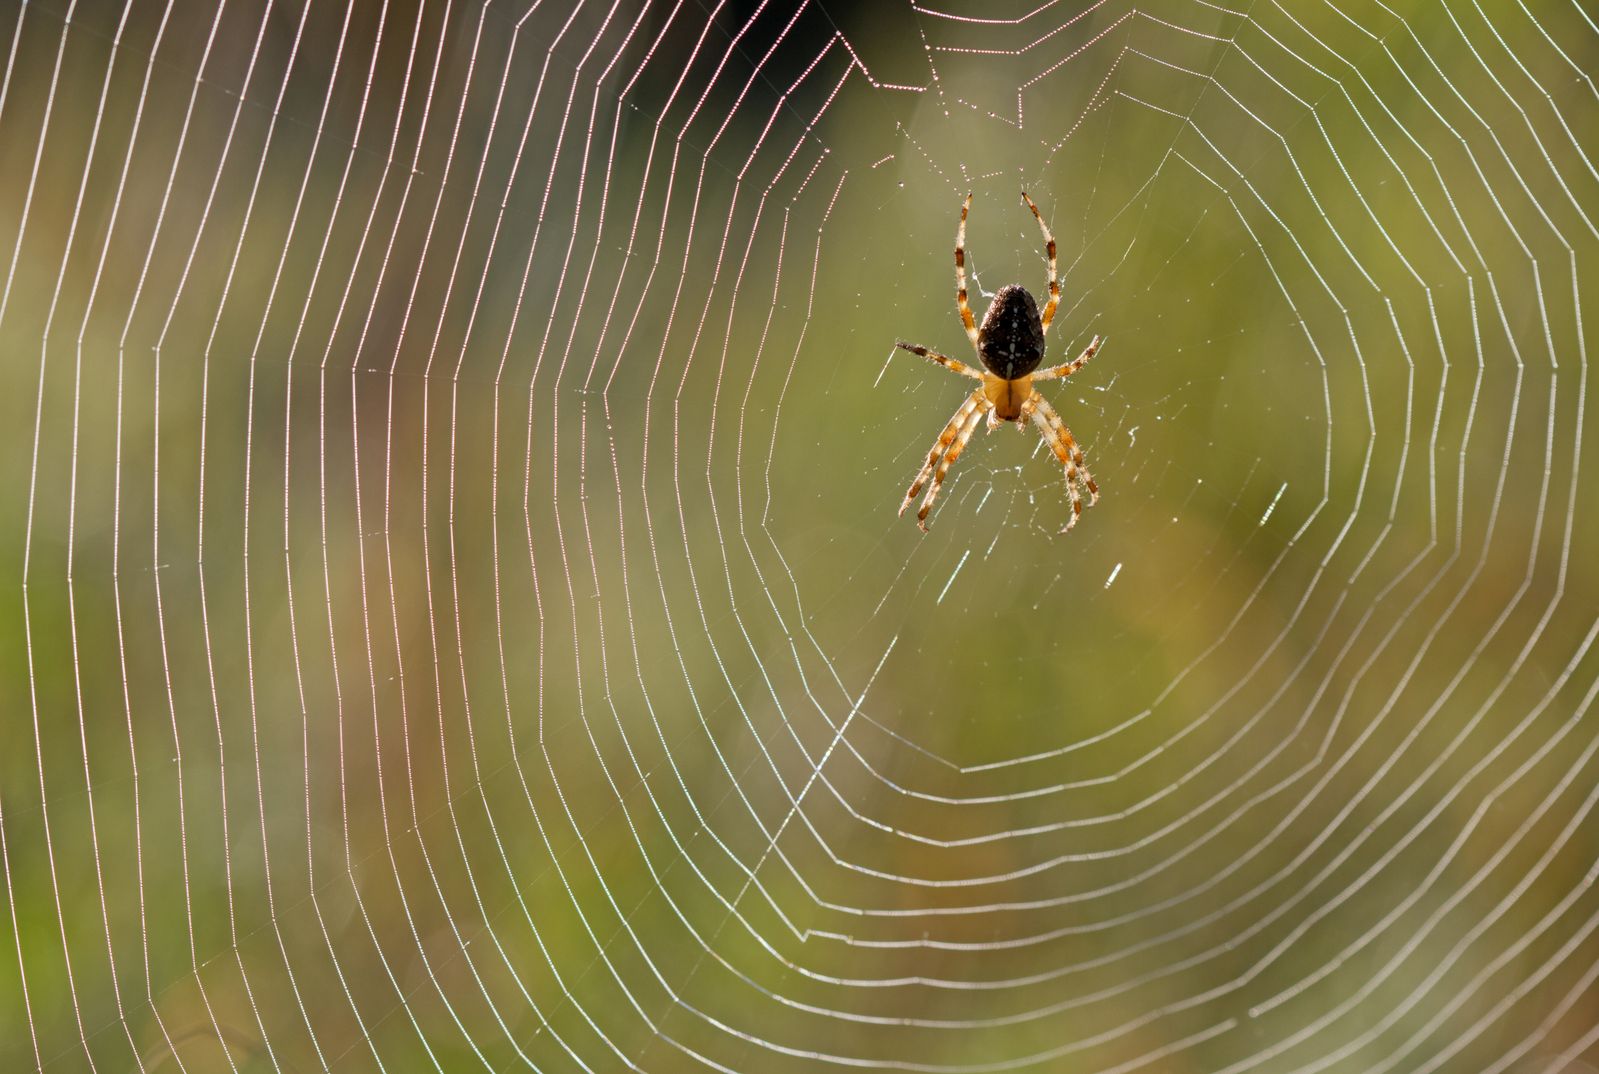 Listen to the music of a spider's web. Tell me what do you hear?